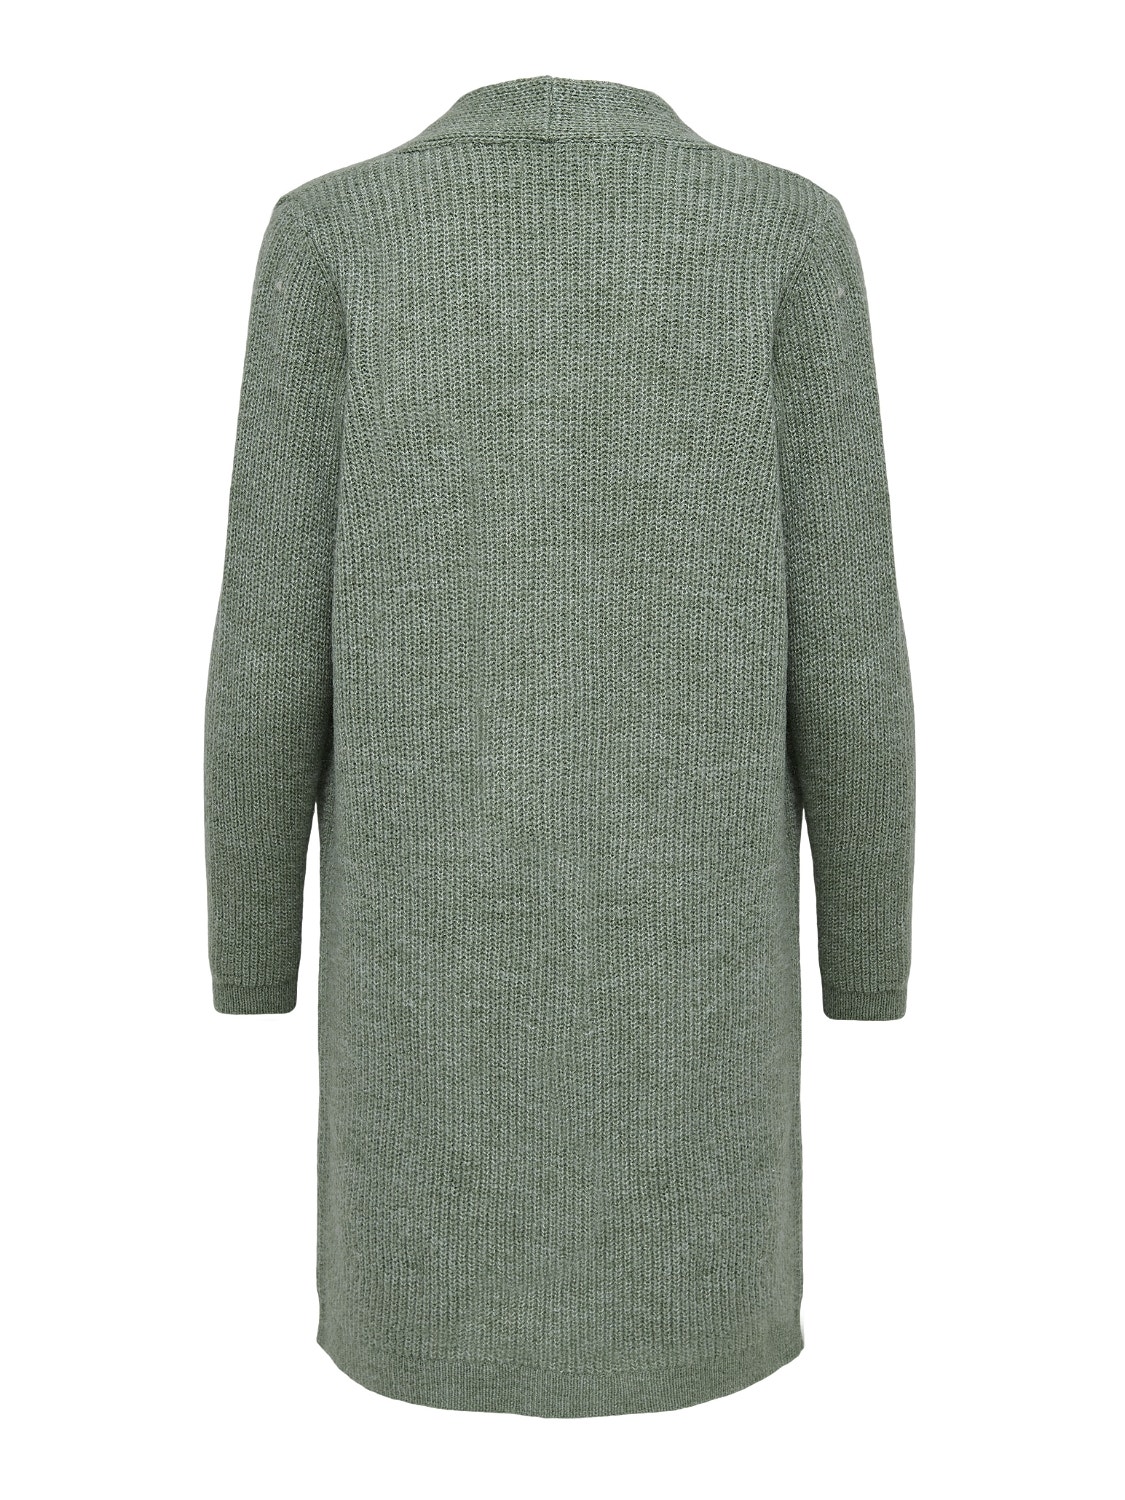 ONLY long knit cardigan with pockets  -Granite Green - 15179815